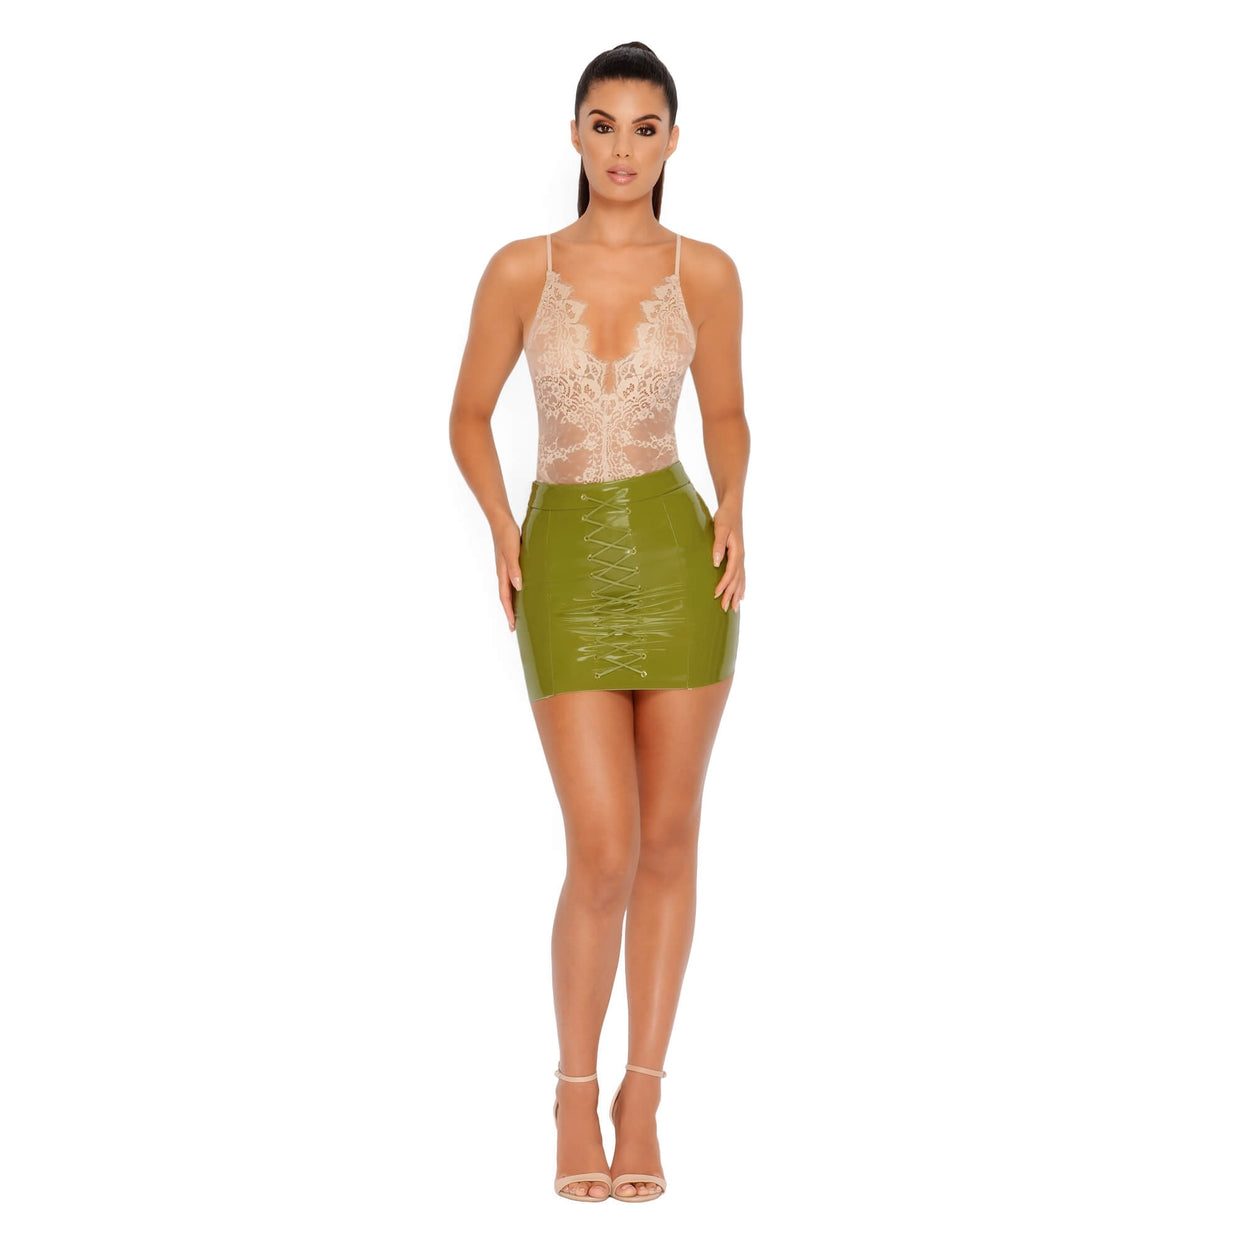 Of Corset Lace Up Vinyl Mini Skirt in Kale